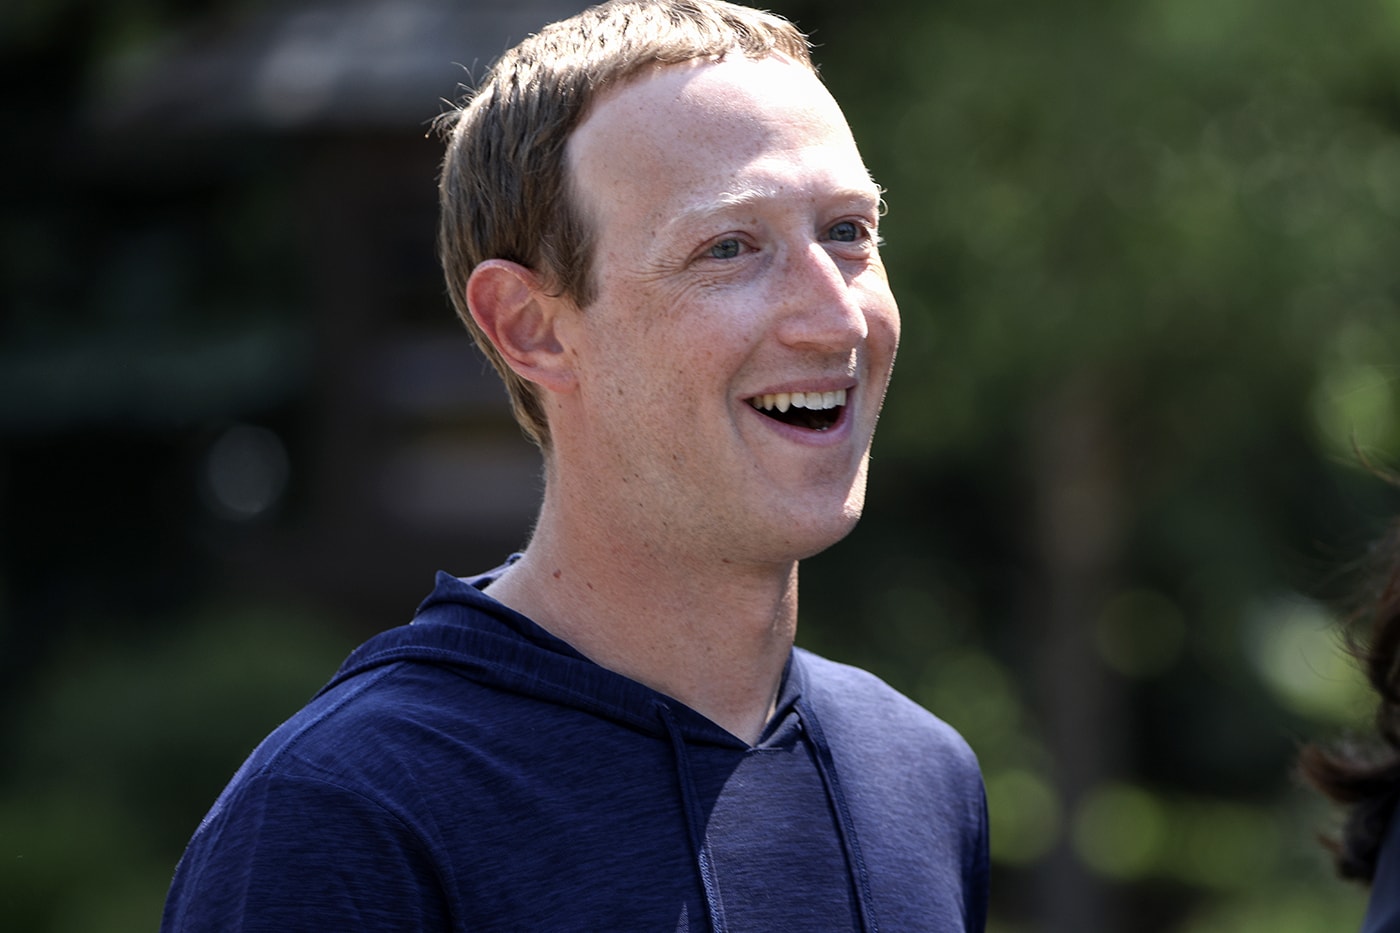 Mark Zuckerberg Says Generative AI Is Coming to All Meta Products facebook messenger instagram whatsapp chatbots image editing tools artificial intelligence